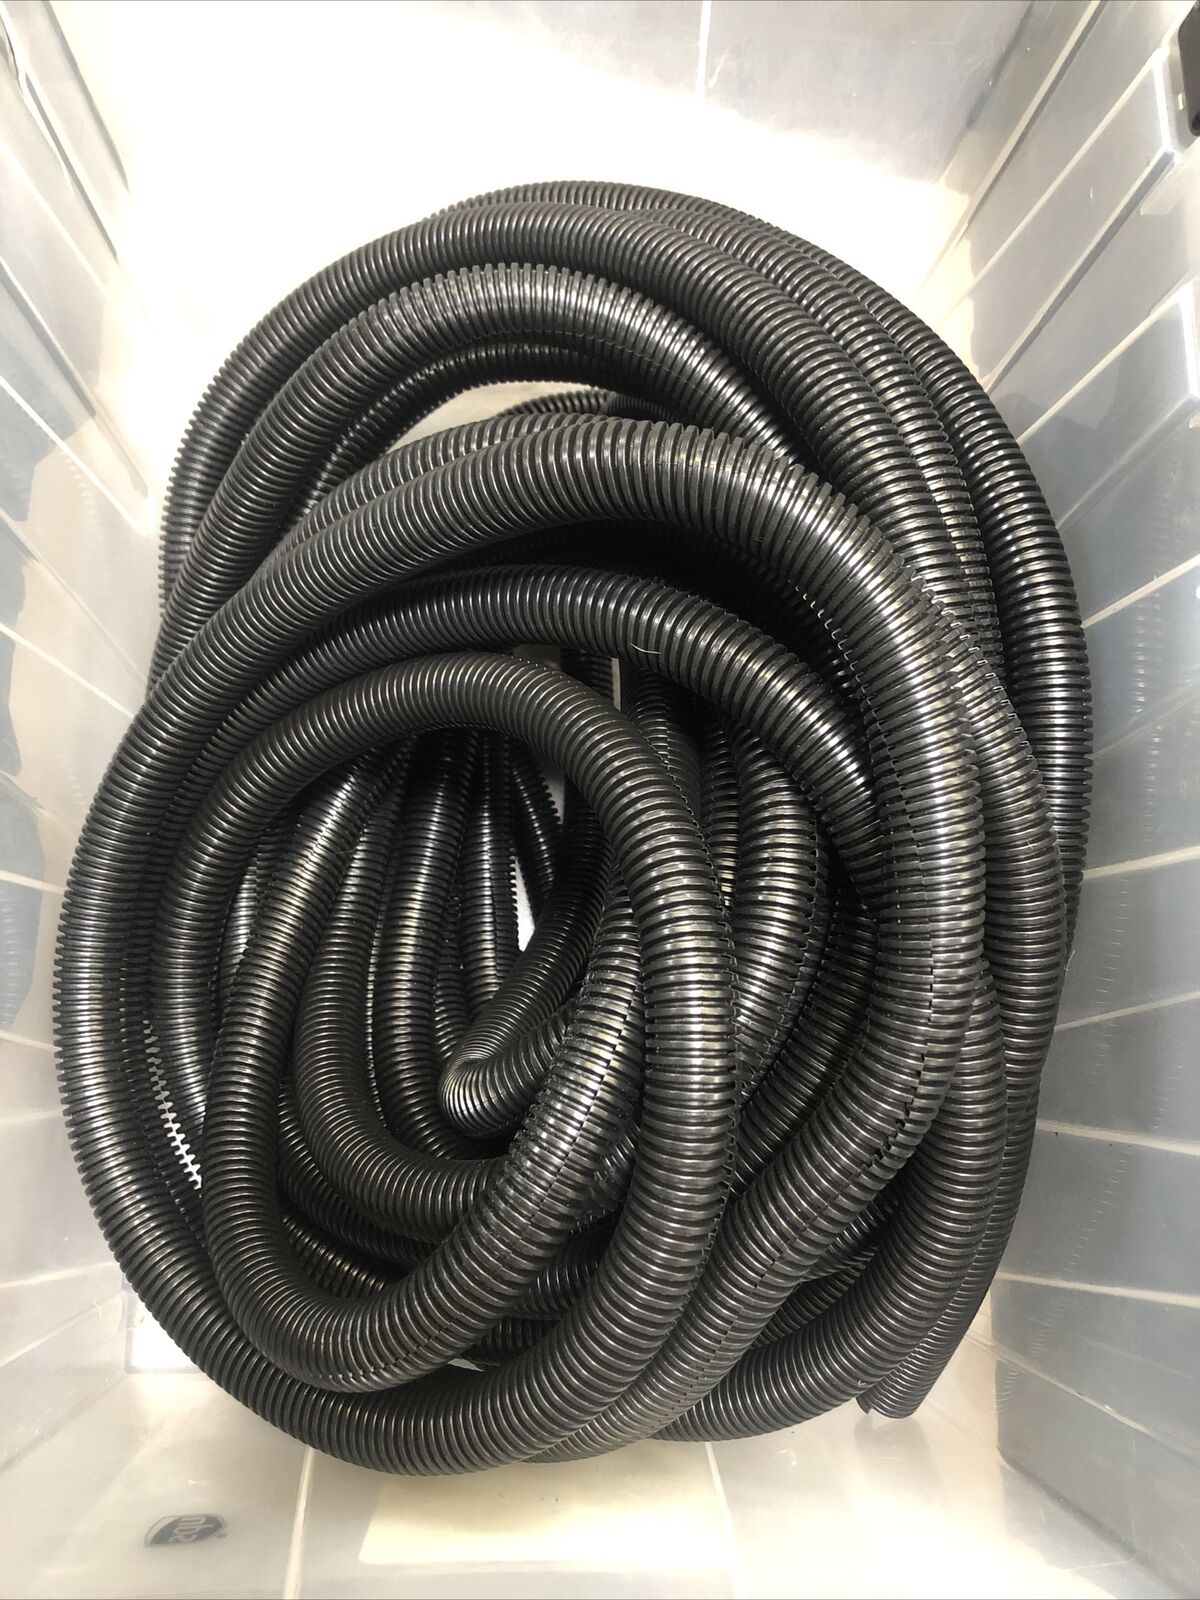  BLACK FLEXIBLE SPLIT LOOM 1 INCH, 64FT FOR CORD CABLE CONDUIT HOSE - NEW